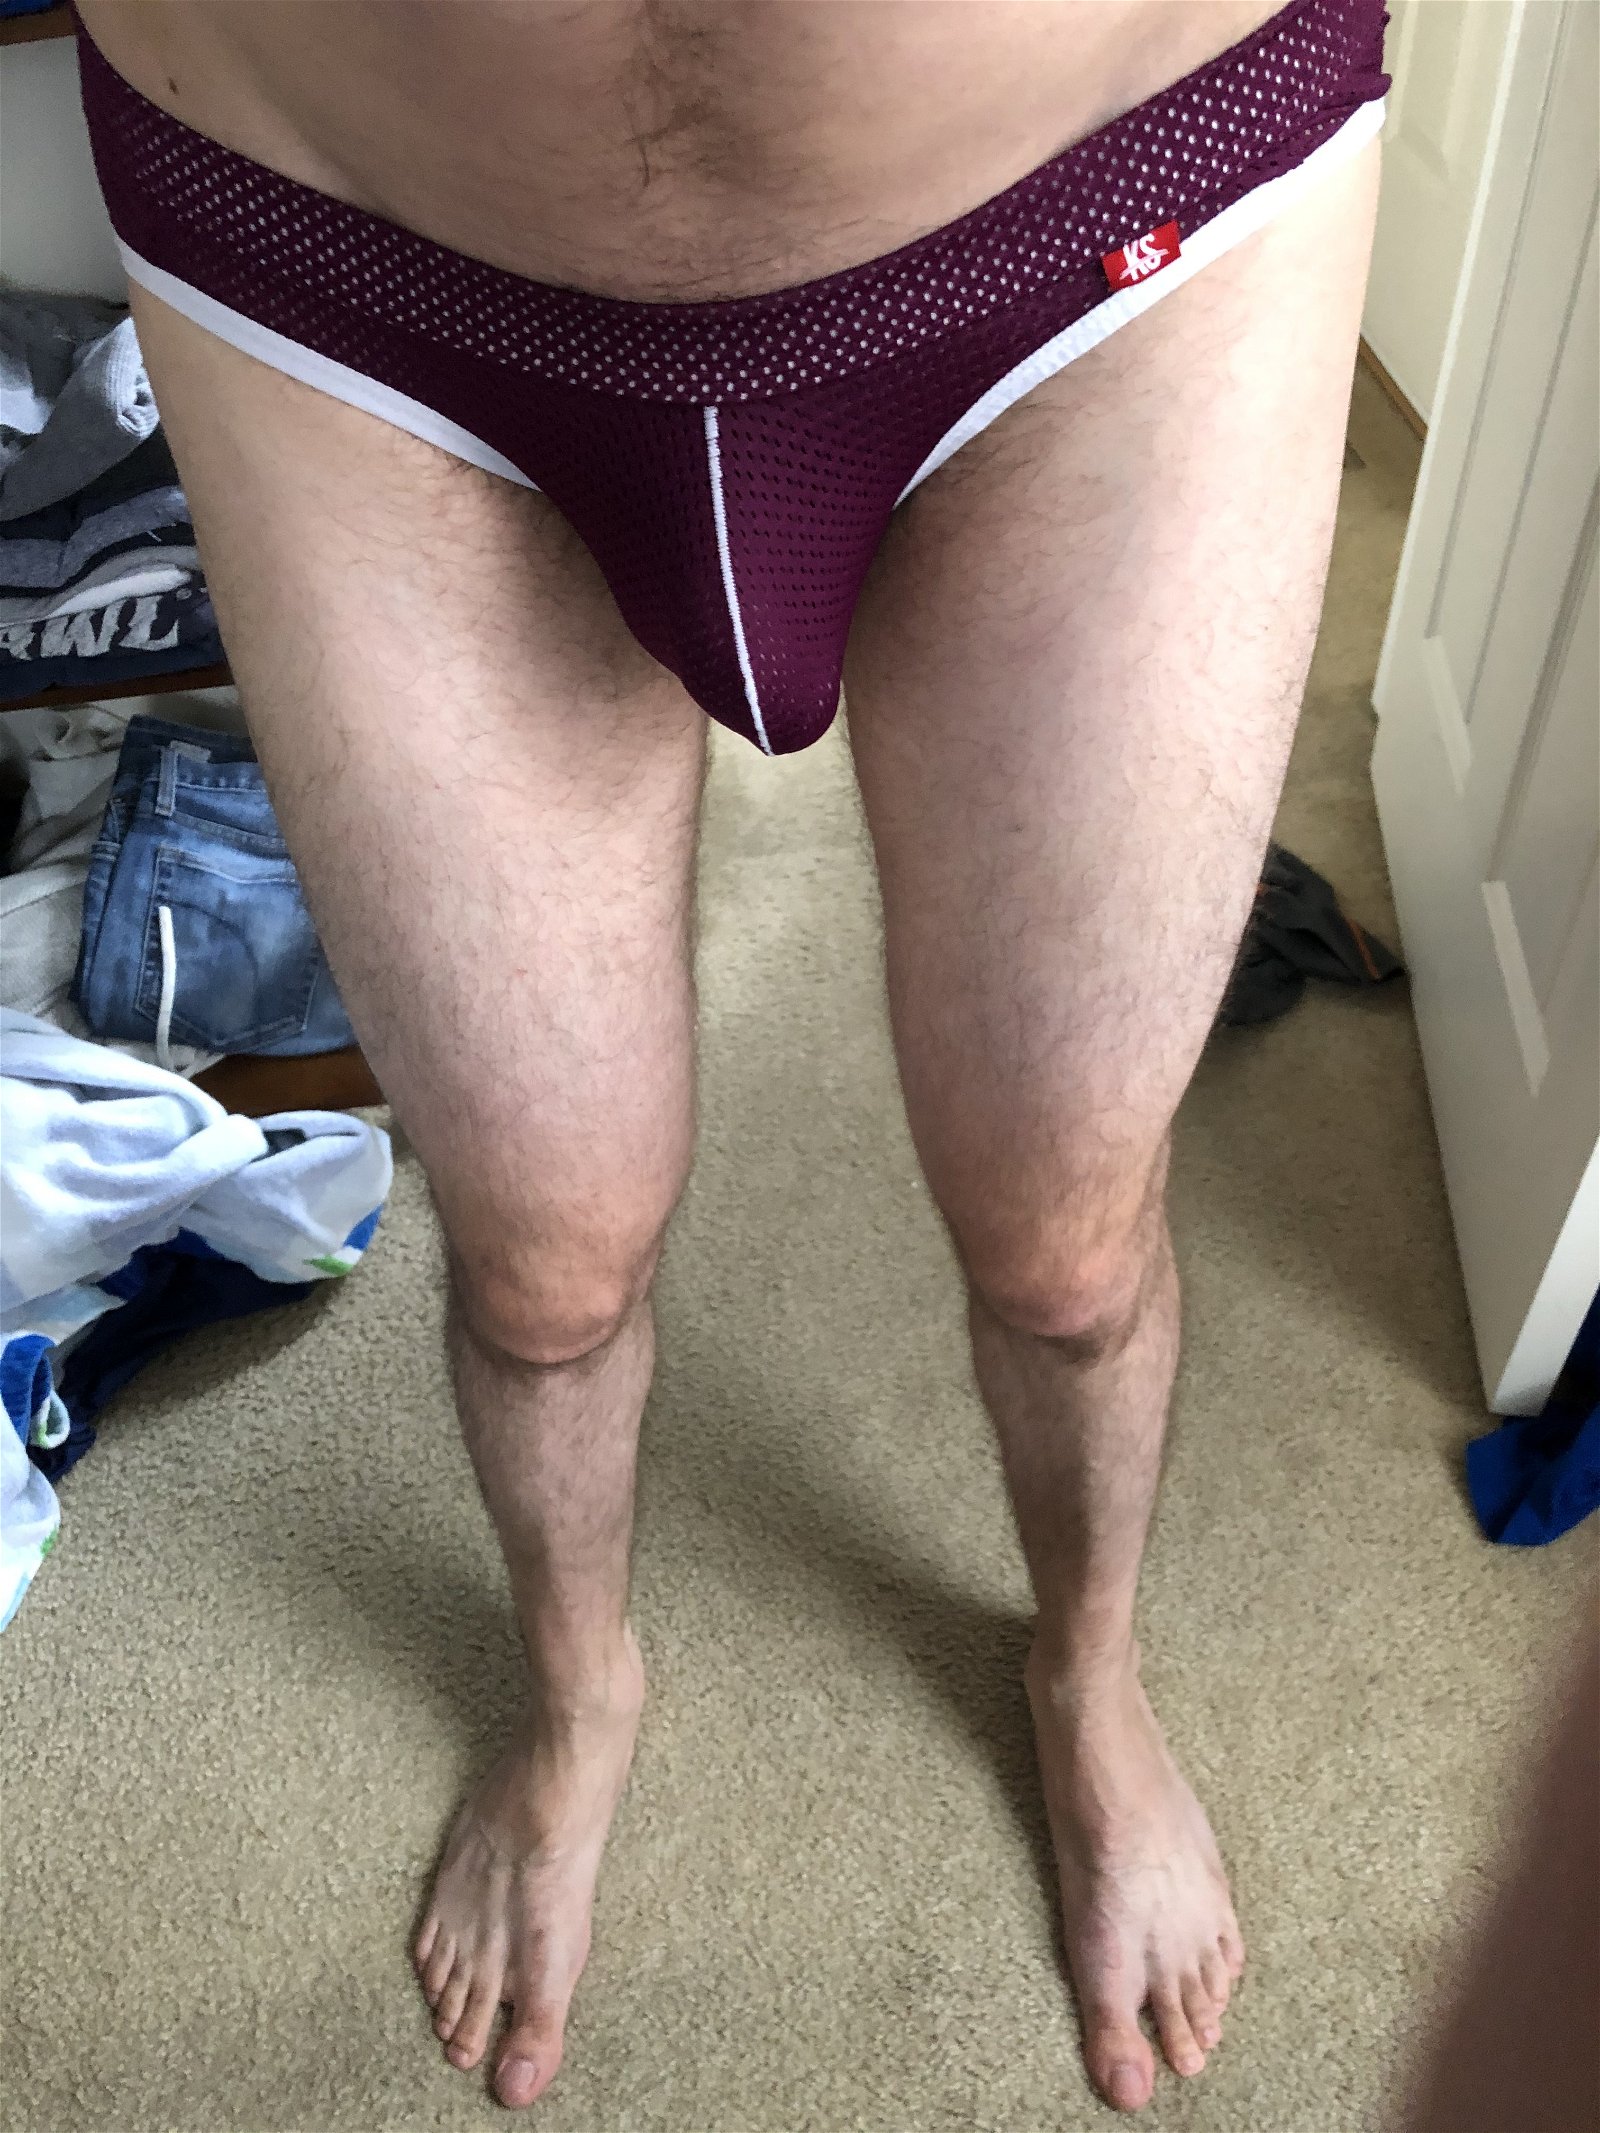 Watch the Photo by CuddleFkkr with the username @CuddleFkkr, posted on July 12, 2020. The post is about the topic Gay Undies. and the text says 'Trying on my mesh Arjen Kroos jocks'